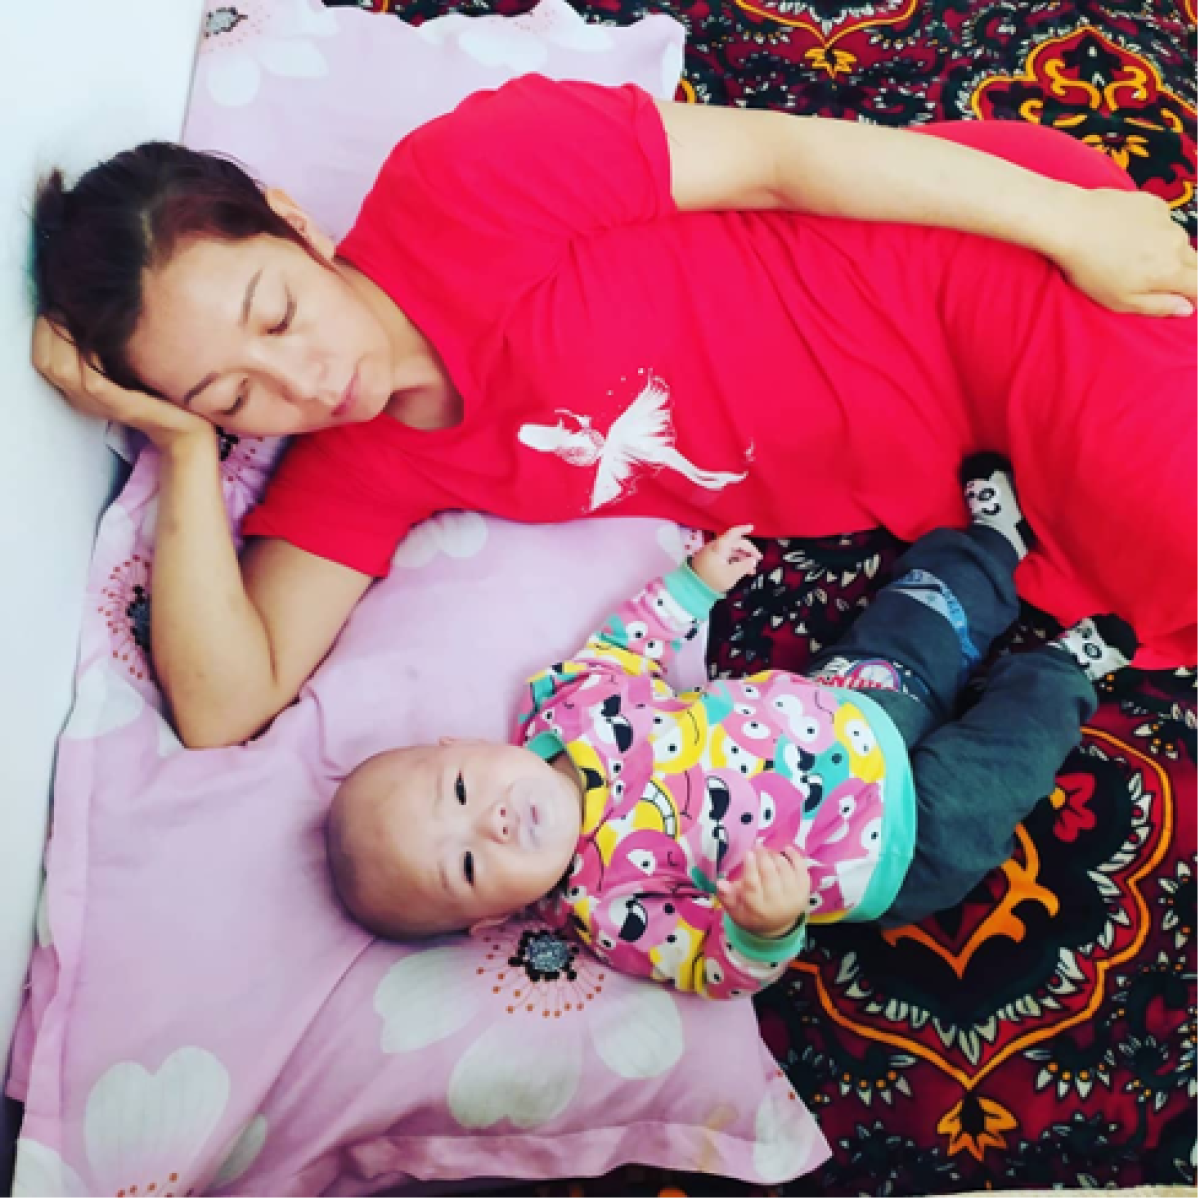 Maral Shorayeva laying down with her infant daughter